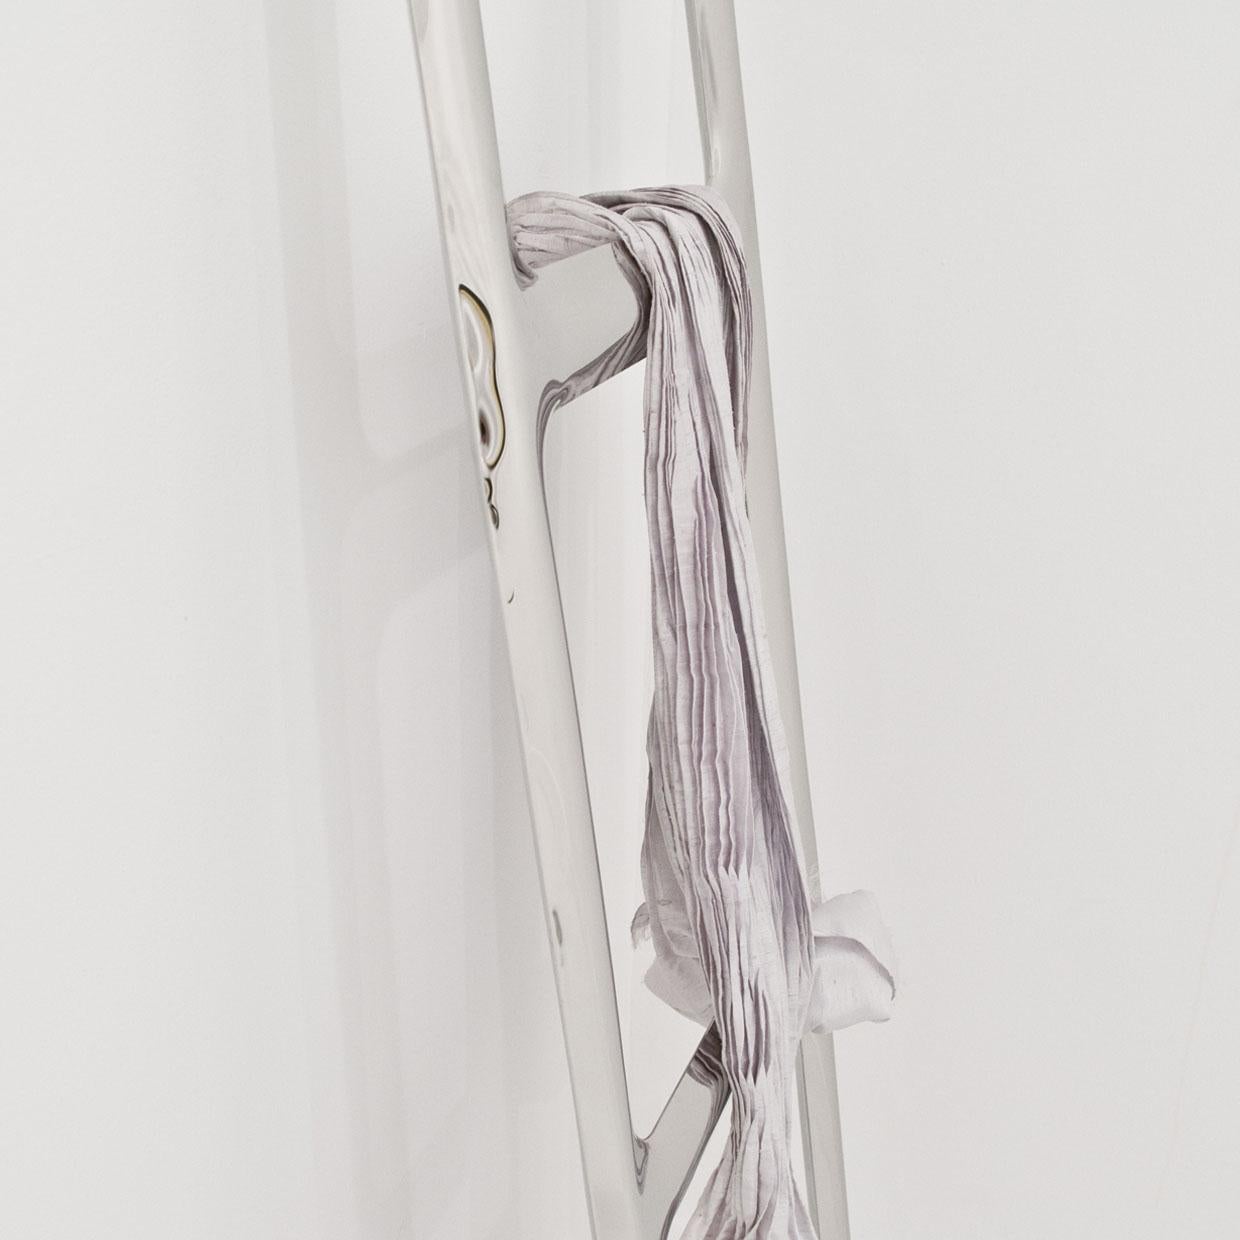 Multiplication of a simple 90 degree shaped ‘H’ letter inflated in FiDU – designed as a bedroom hanger for dressing-gowns and towels.

Darb Hanger is available in carbon steel and stainless steel with the following finish options;

Carbon